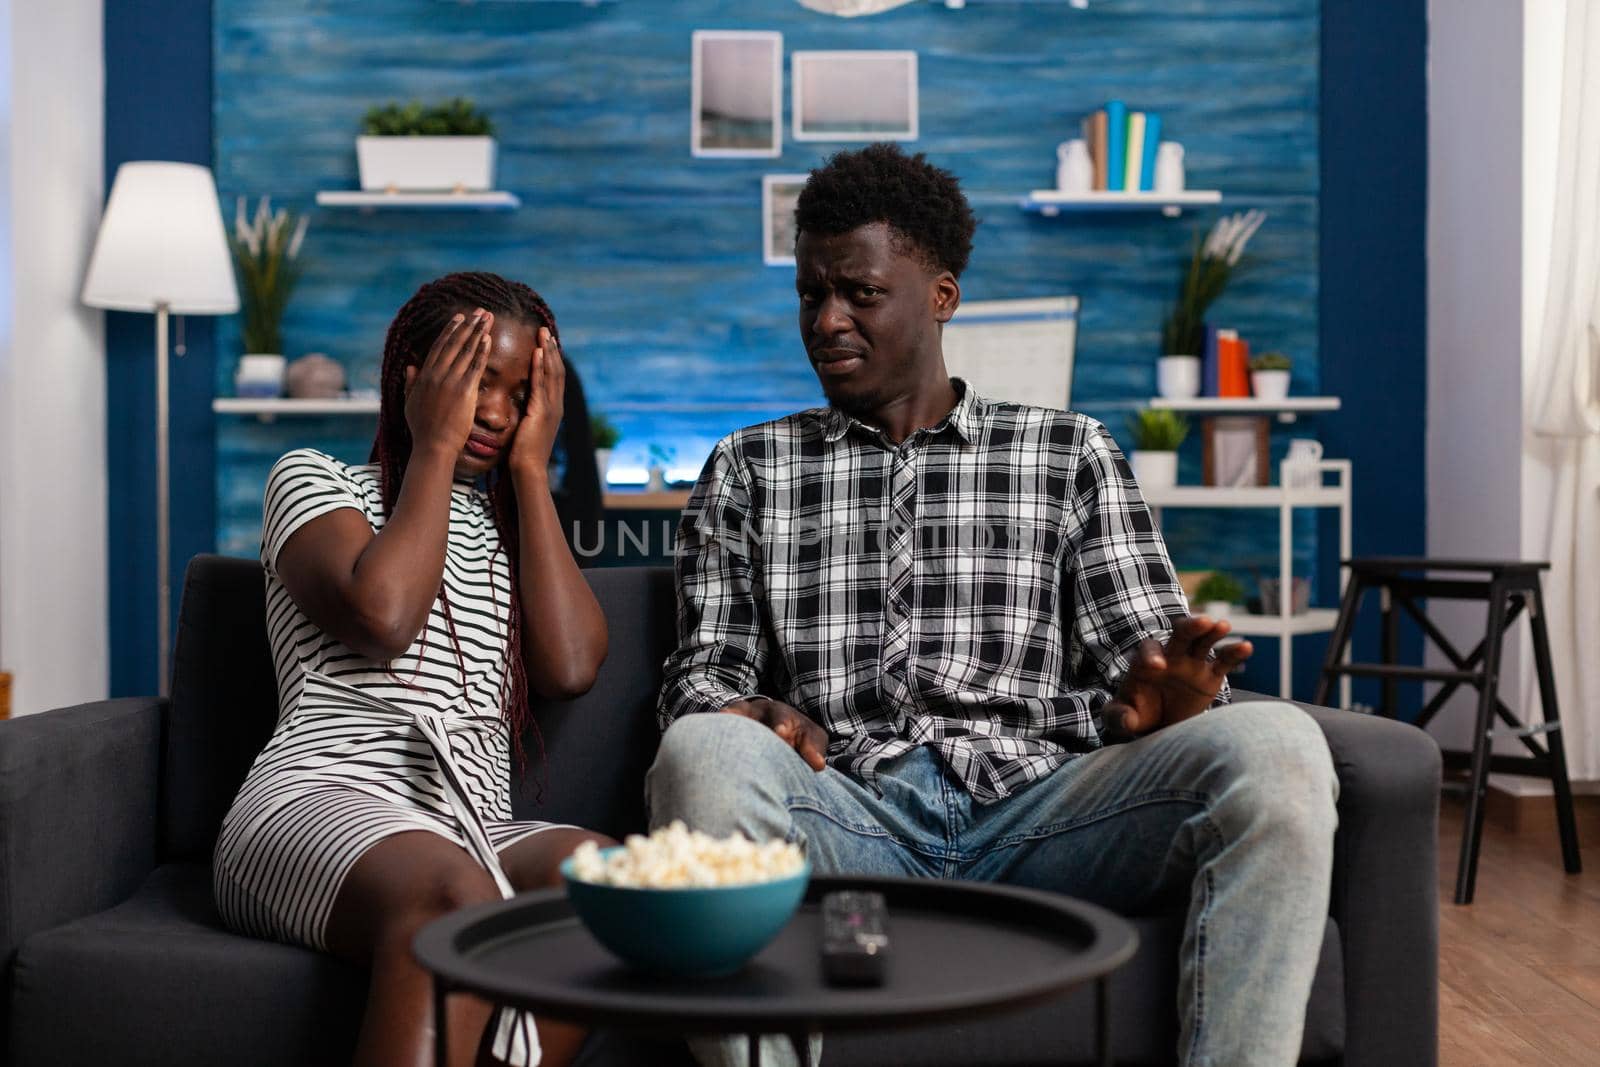 African american people watching scary movie on television and being afraid on sofa. Black woman covering eyes at TV while man looking at camera. Couple enjoying horror movie experience